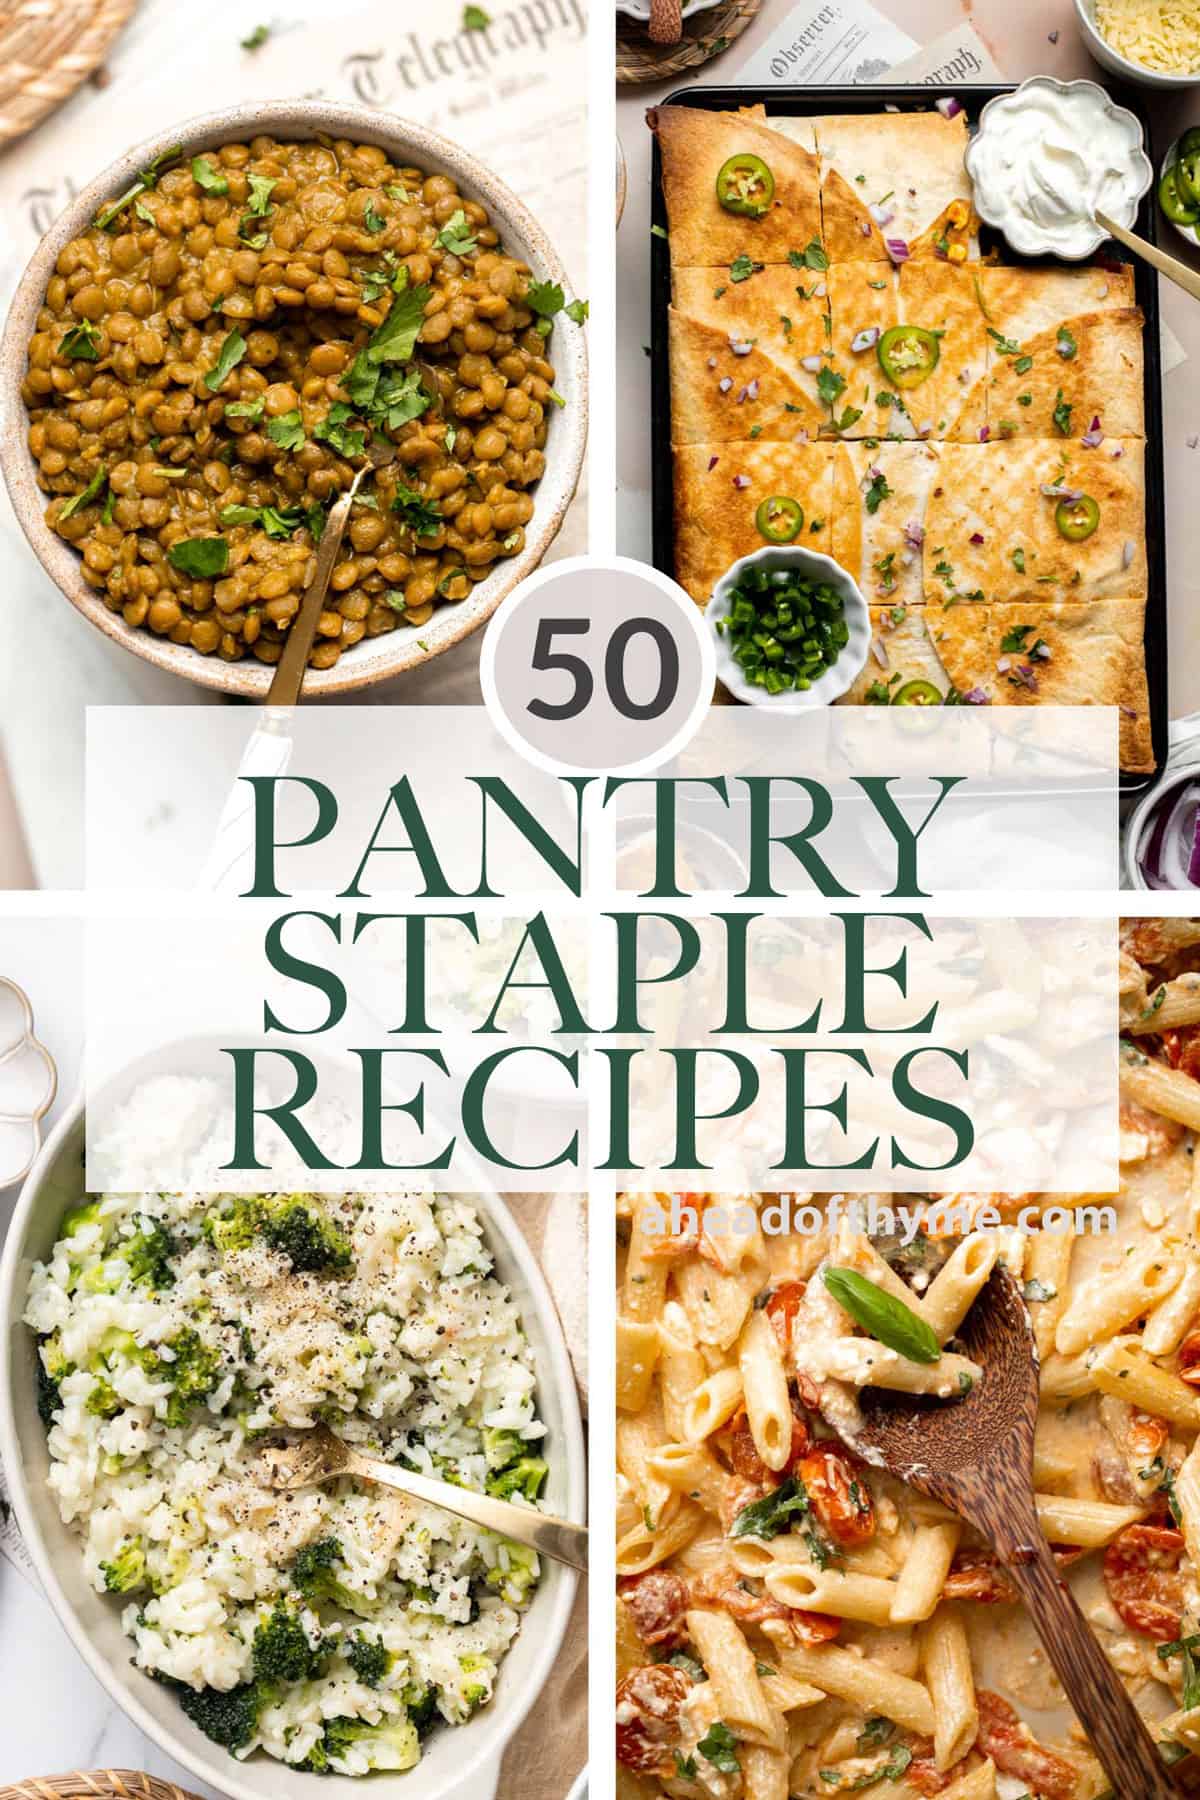 Over 50 easy pantry staple recipes that are delicious and nutritious including everything from beans and rice, soups and stews, pasta and noodles, and more! | aheadofthyme.com